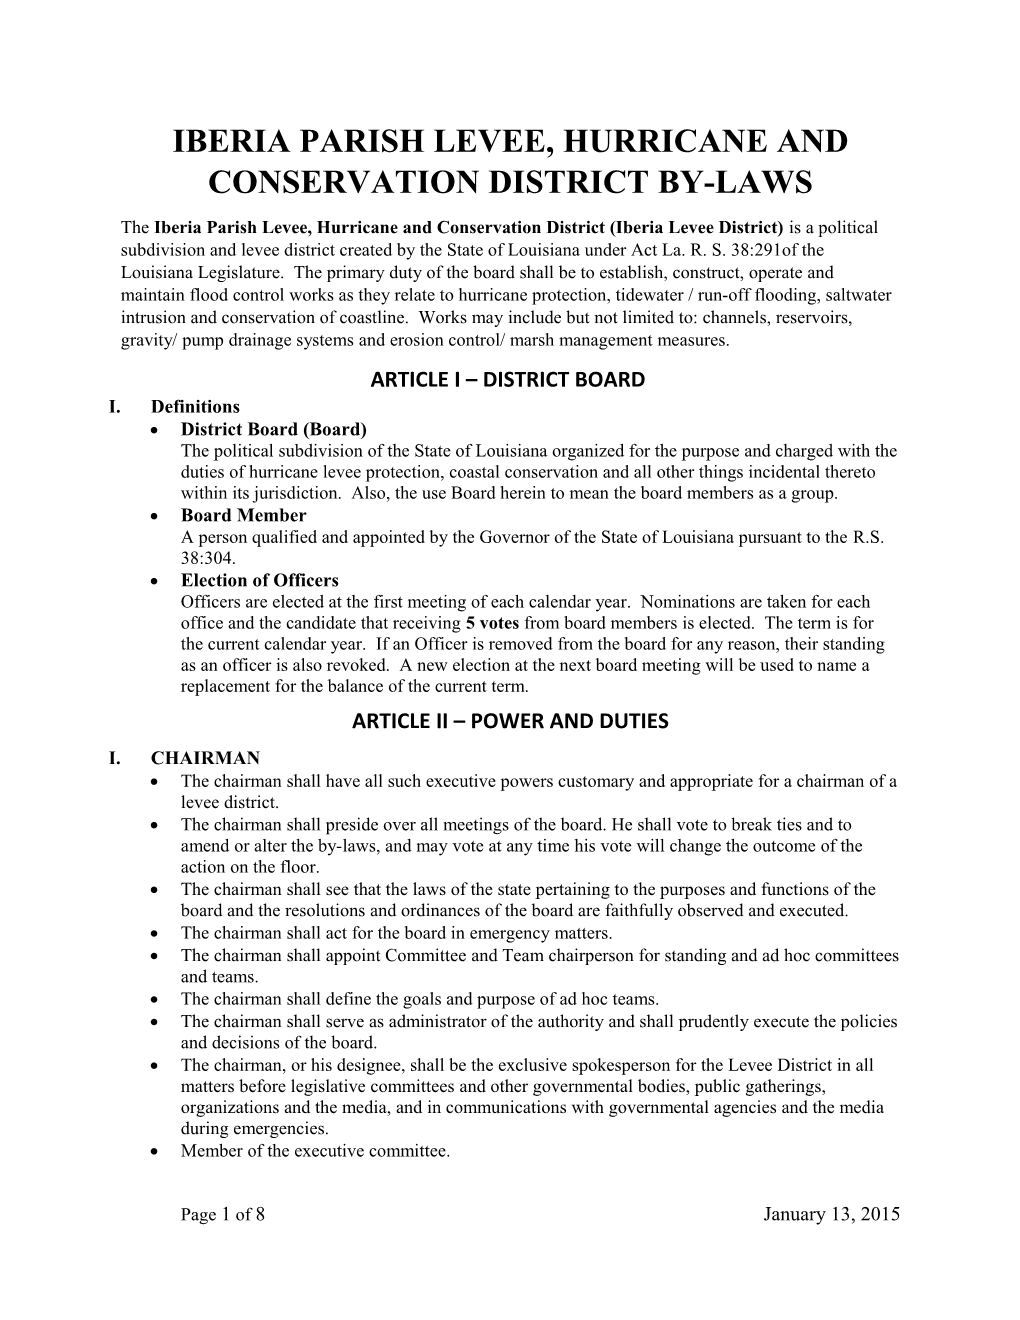 Iberia Parish Levee, Hurricane and Conservation District By-Laws